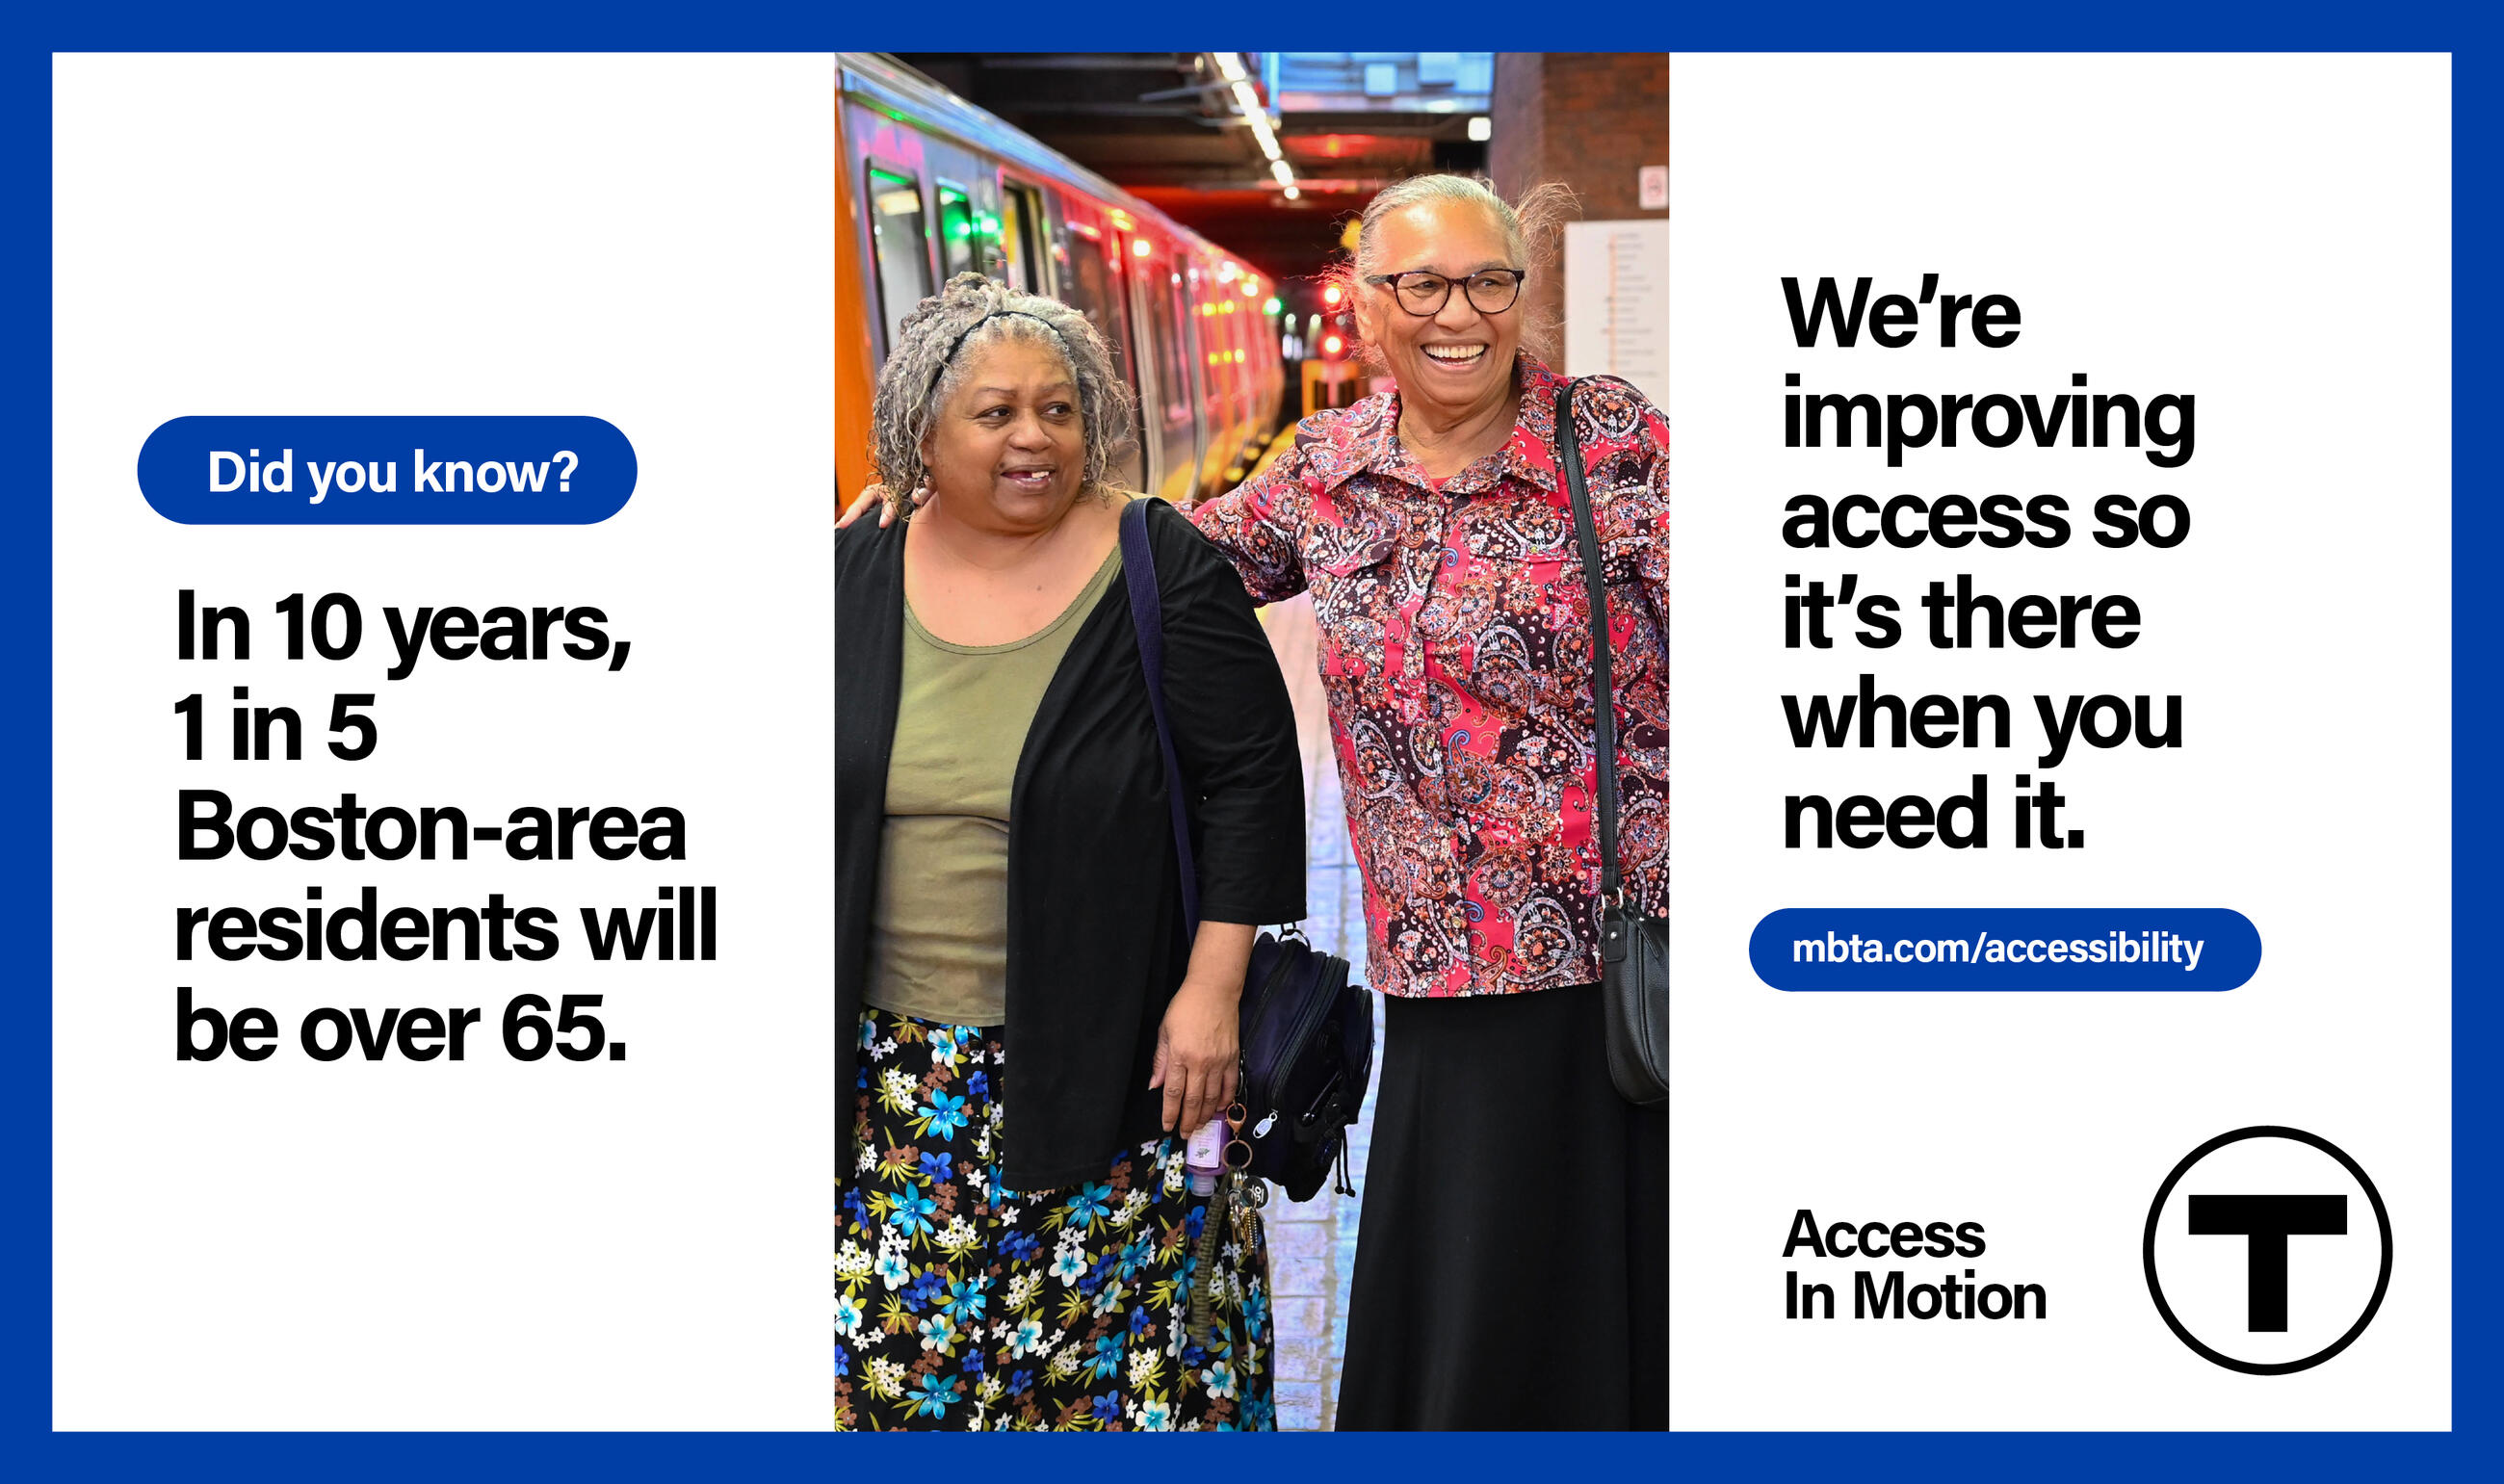 Center panel: Two older adults, both Latina women, walk side by side down an MBTA subway platform. The taller woman has her arm around the shorter woman’s shoulders. Right panel (text): “Did you know? In 10 years, 1 in 5 Boston-area residents will be over 65.” Right panel (text): “We’re improving access so it’s there when you need it. mbta.com/accessibility” followed by the “Access In Motion” tagline and the T logo.